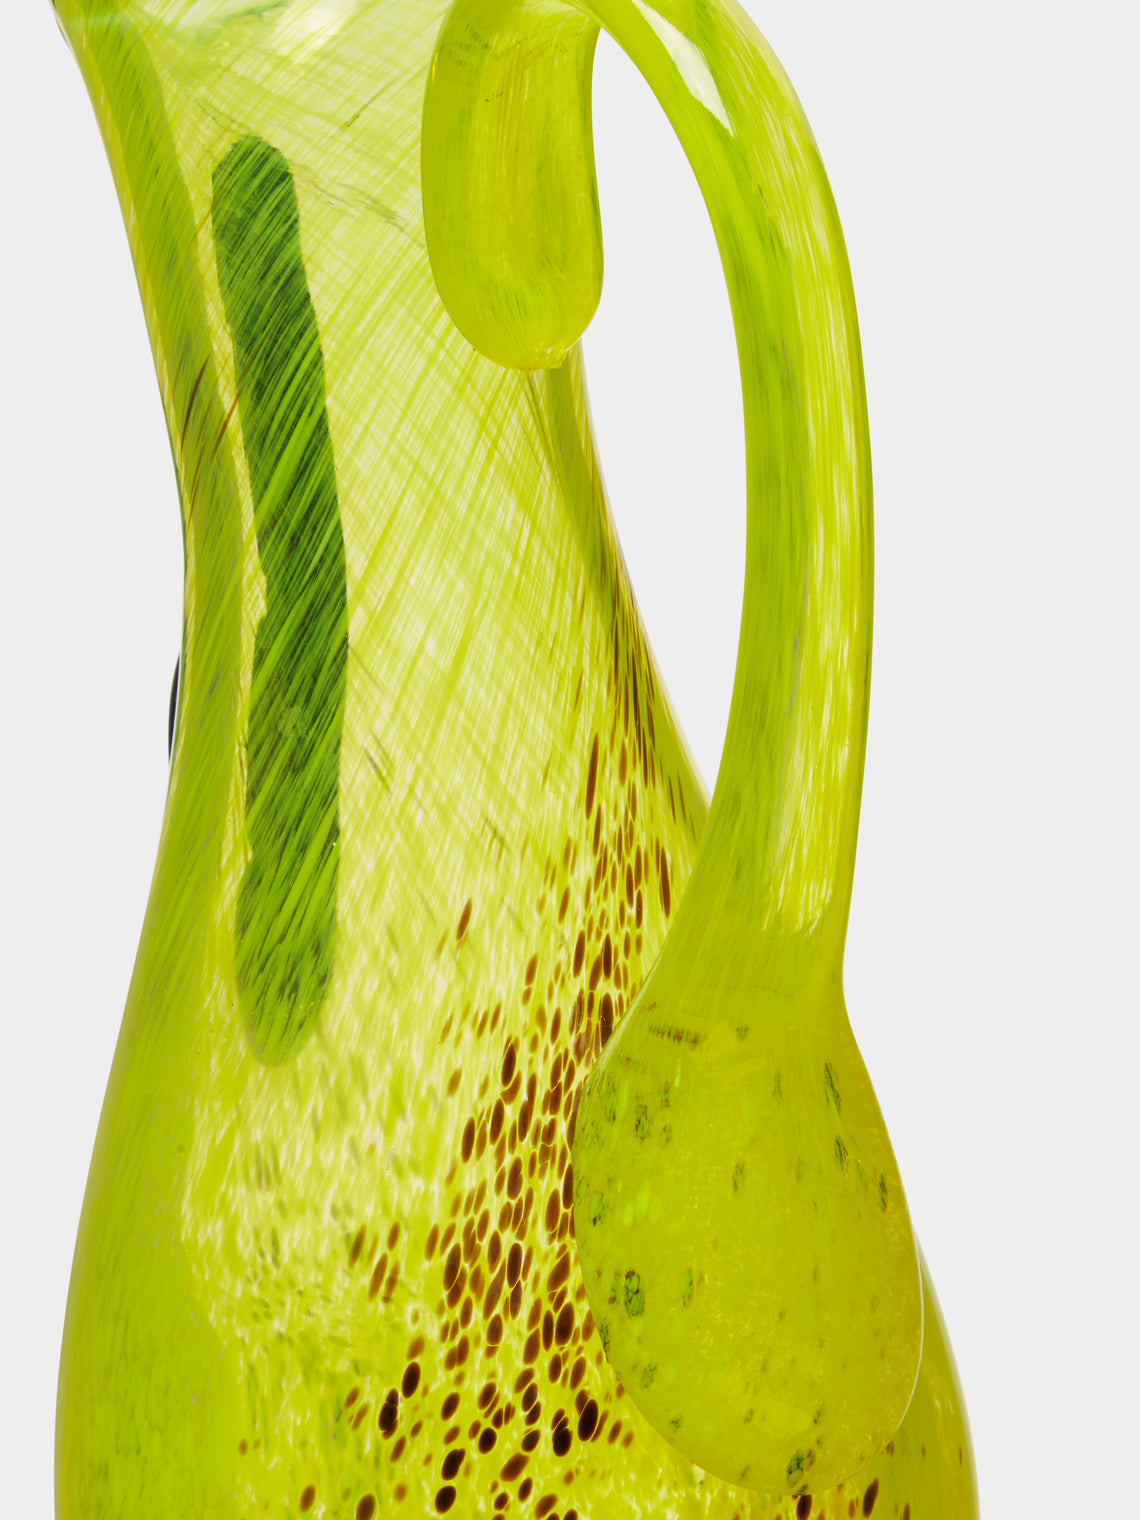 Antique and Vintage - 1950s Kosta Boda Murano Glass Pitcher -  - ABASK